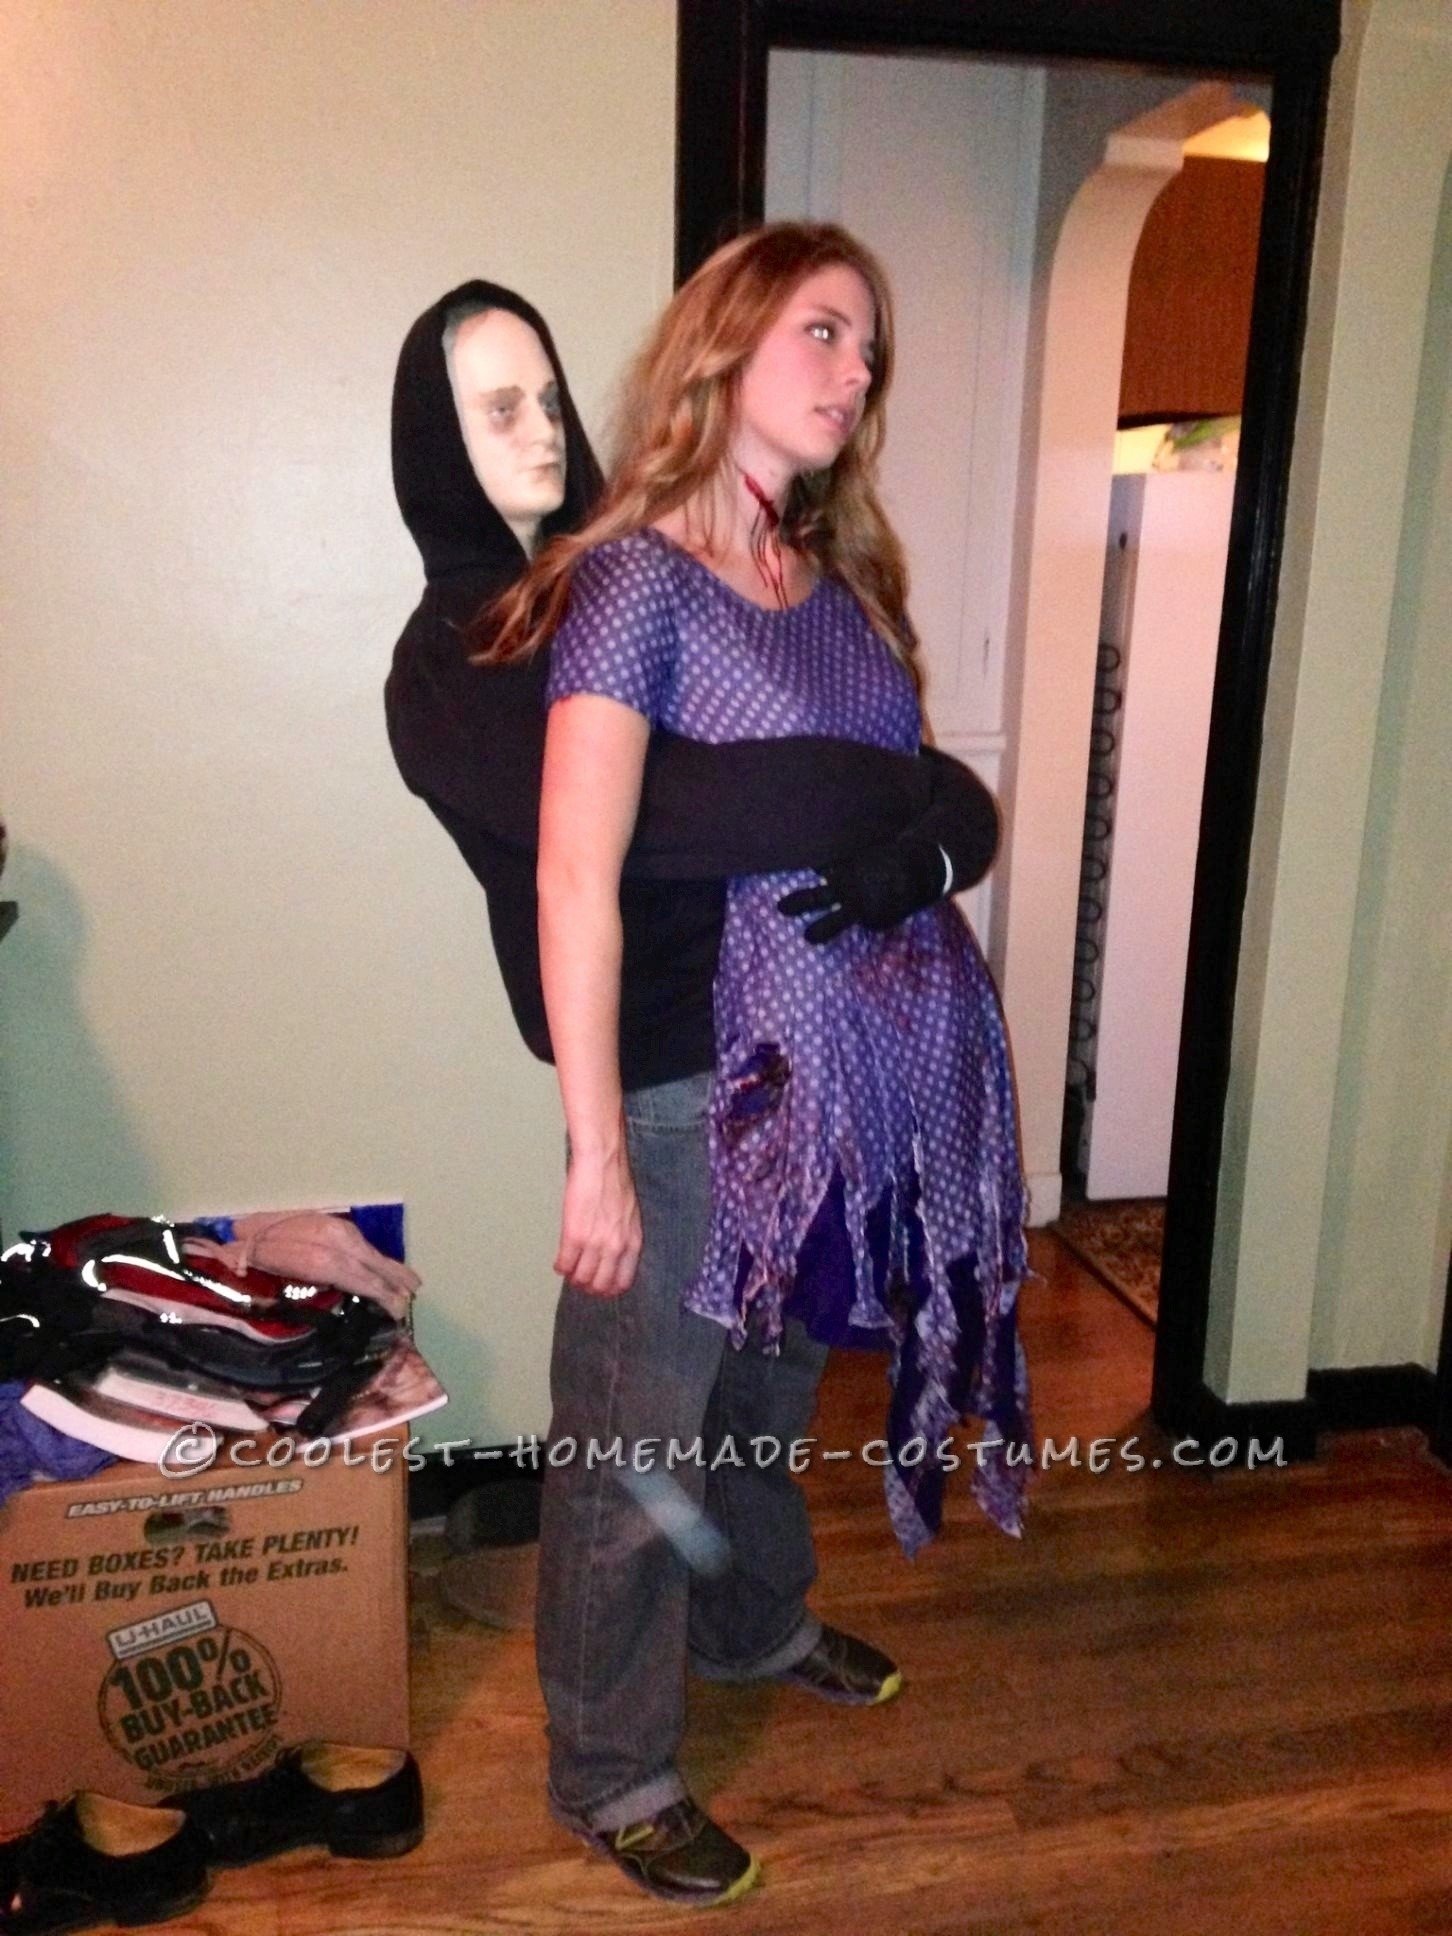 10 Unique Homemade Scary Halloween Costume Ideas scary amputated legs illusion costume scary illusions and costumes 2022